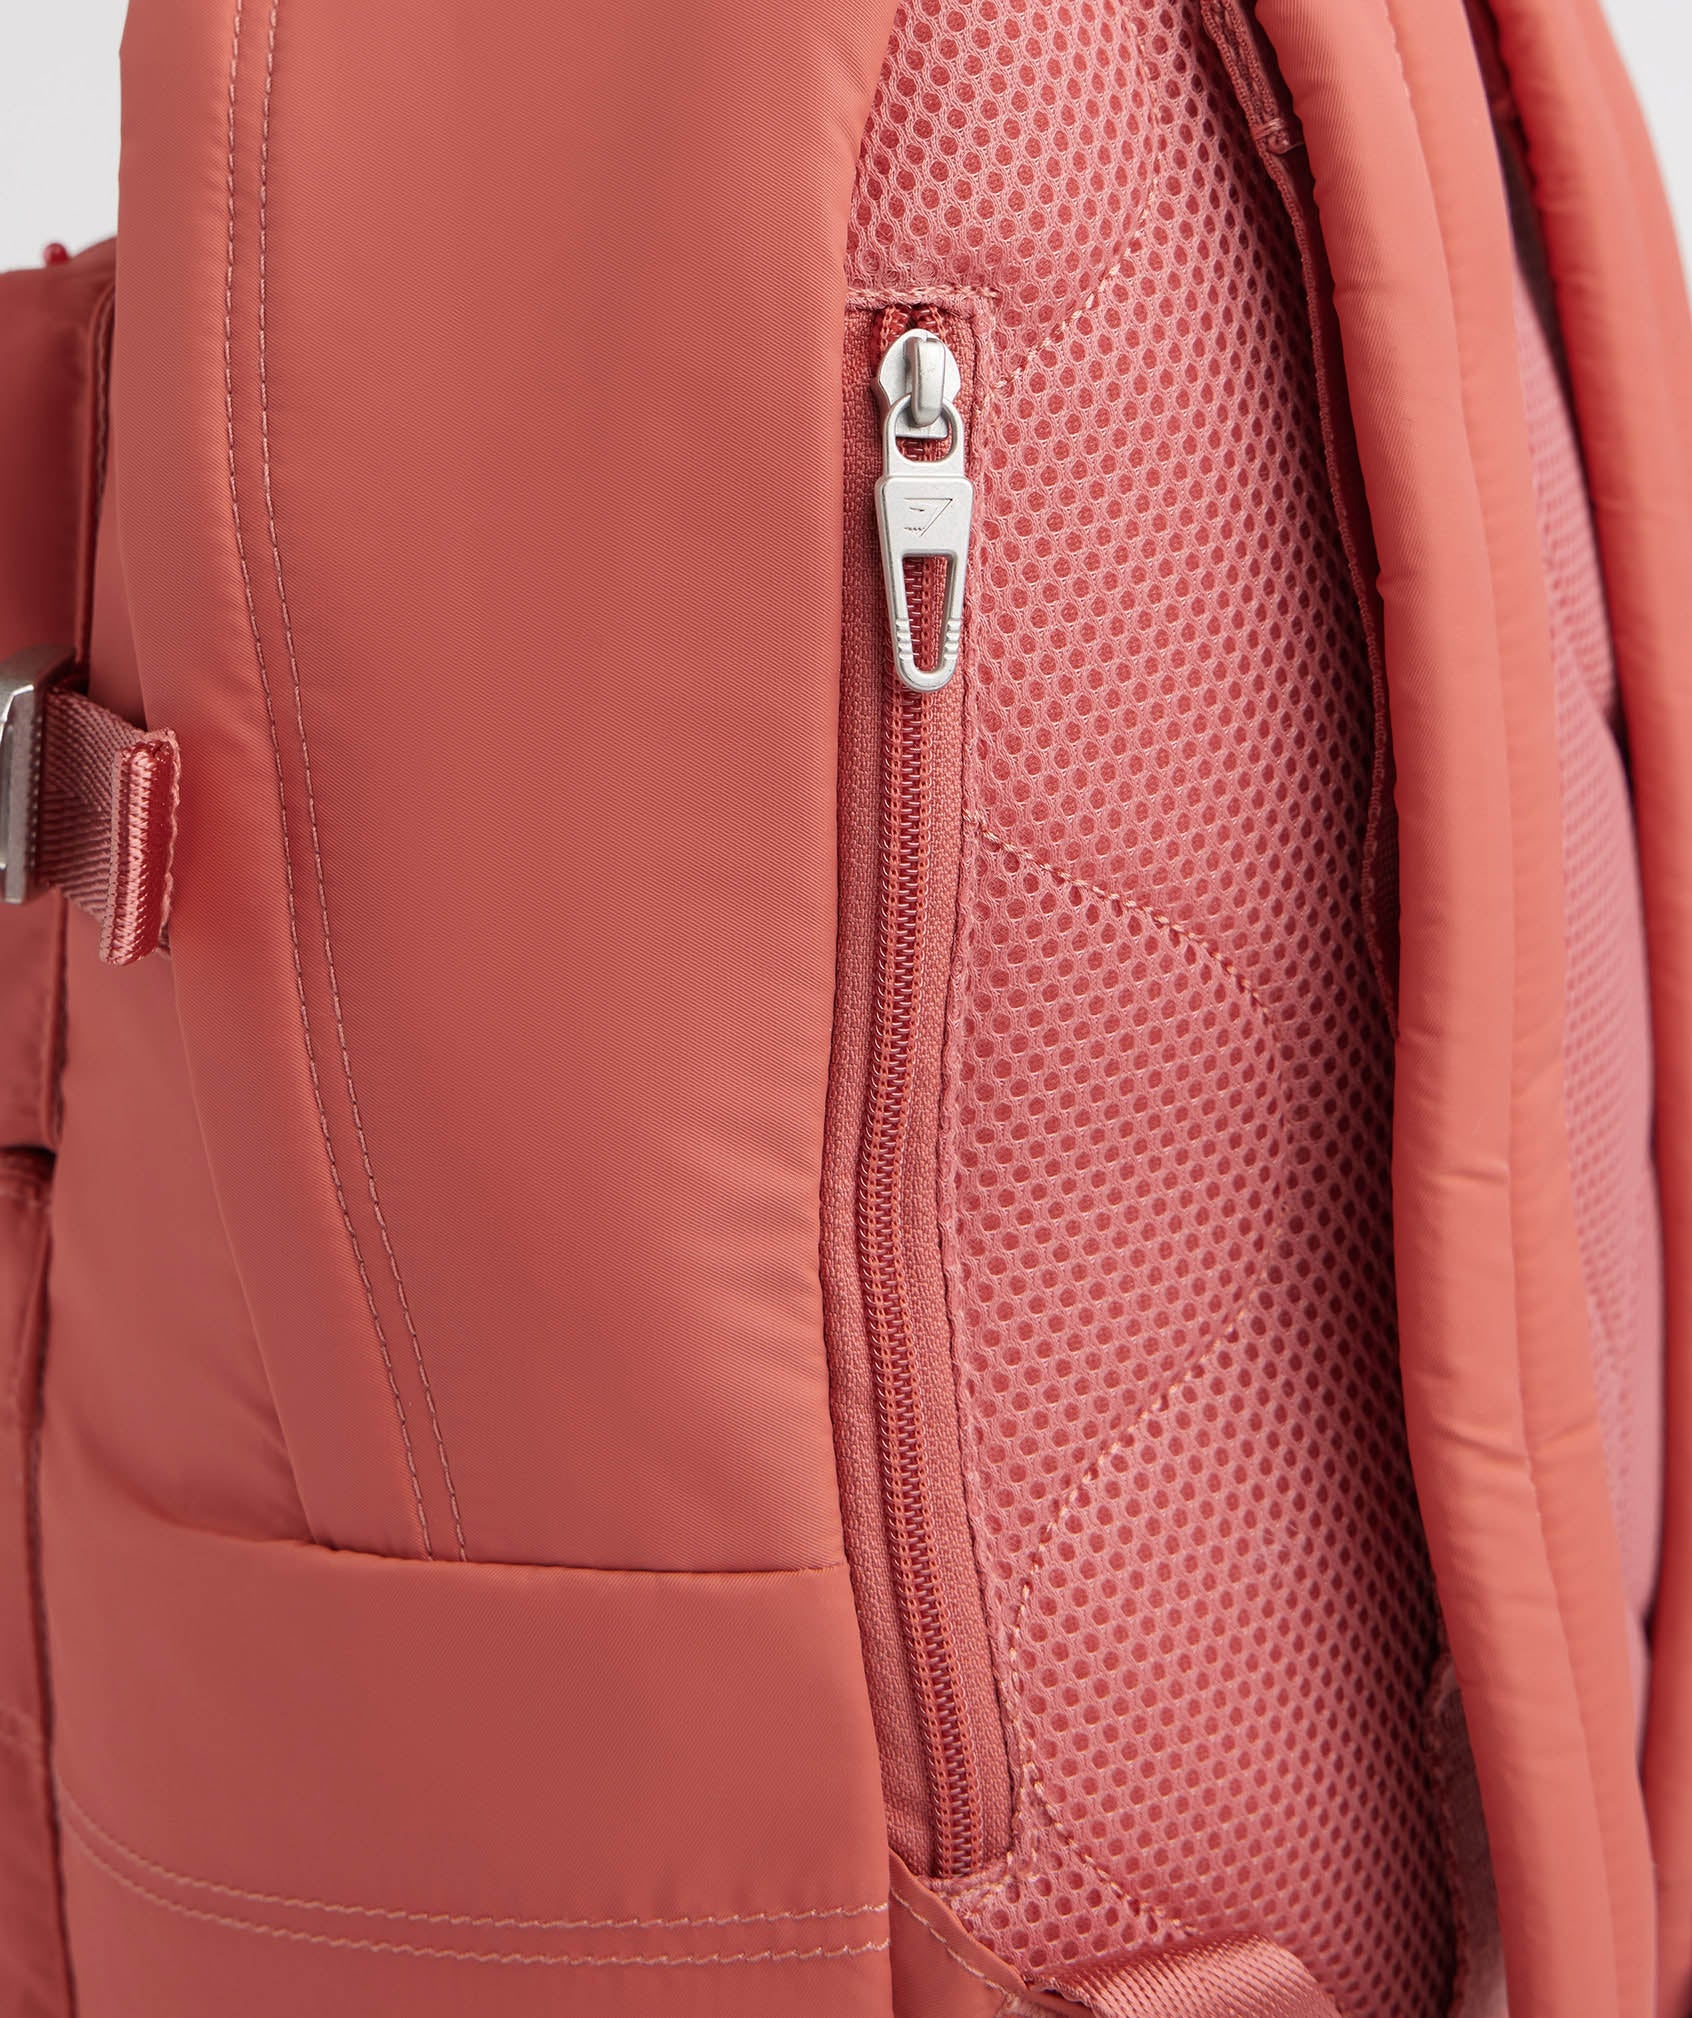 Premium Lifestyle Backpack in Terracotta Pink - view 3